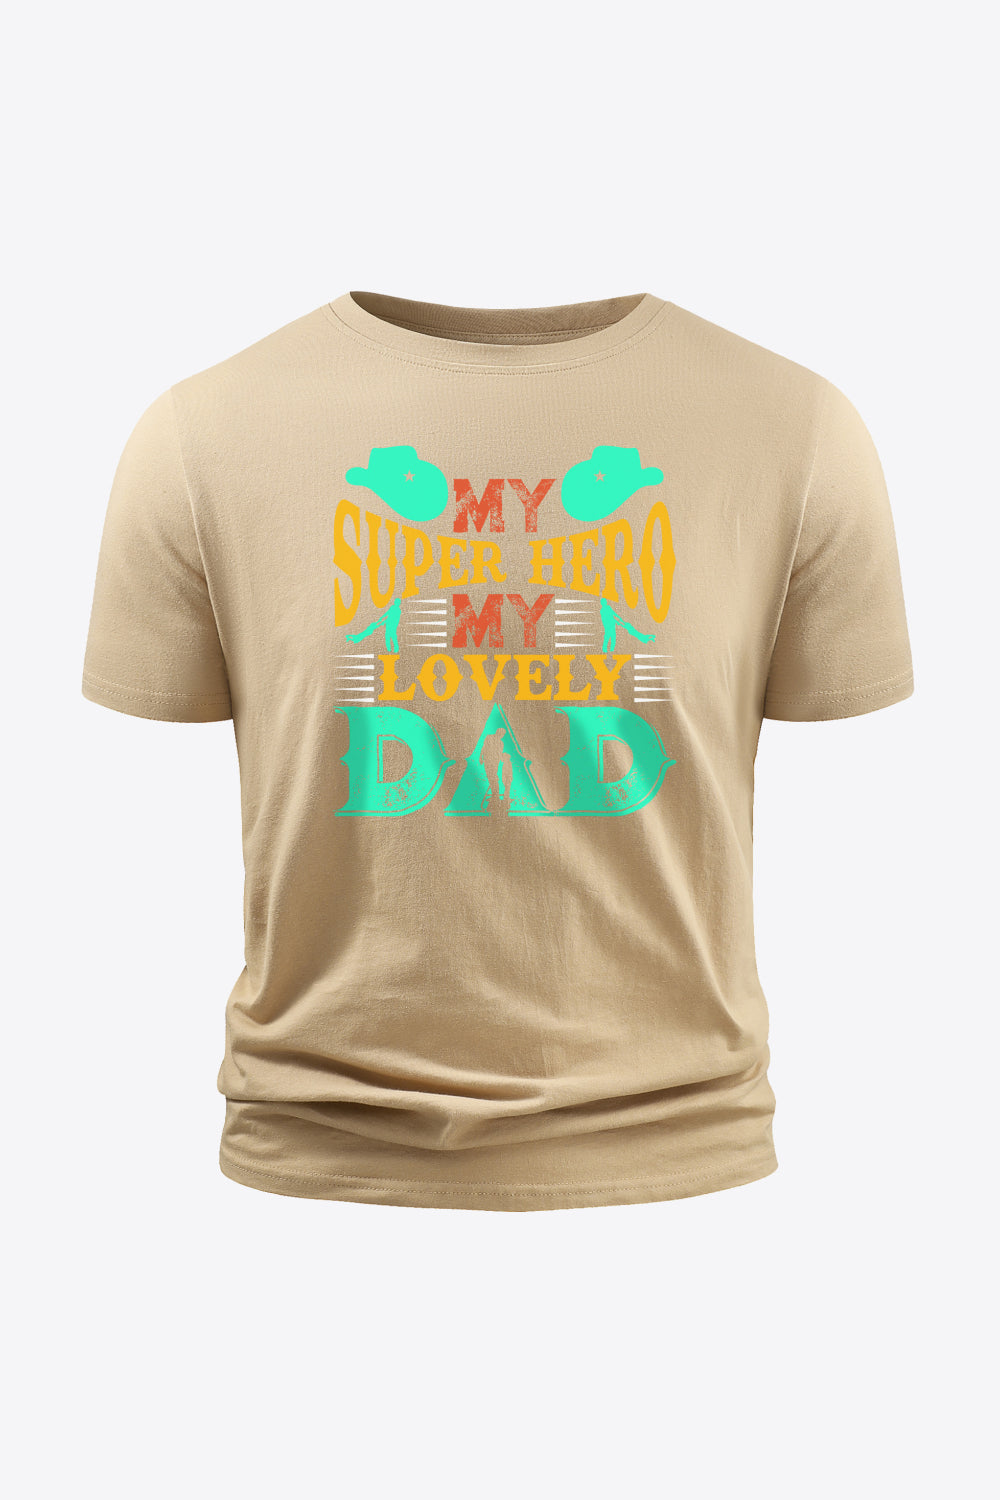 Full Size MY SUPER HERO MY LOVELY DAD Graphic Round Neck Short Sleeve Cotton T-Shirt